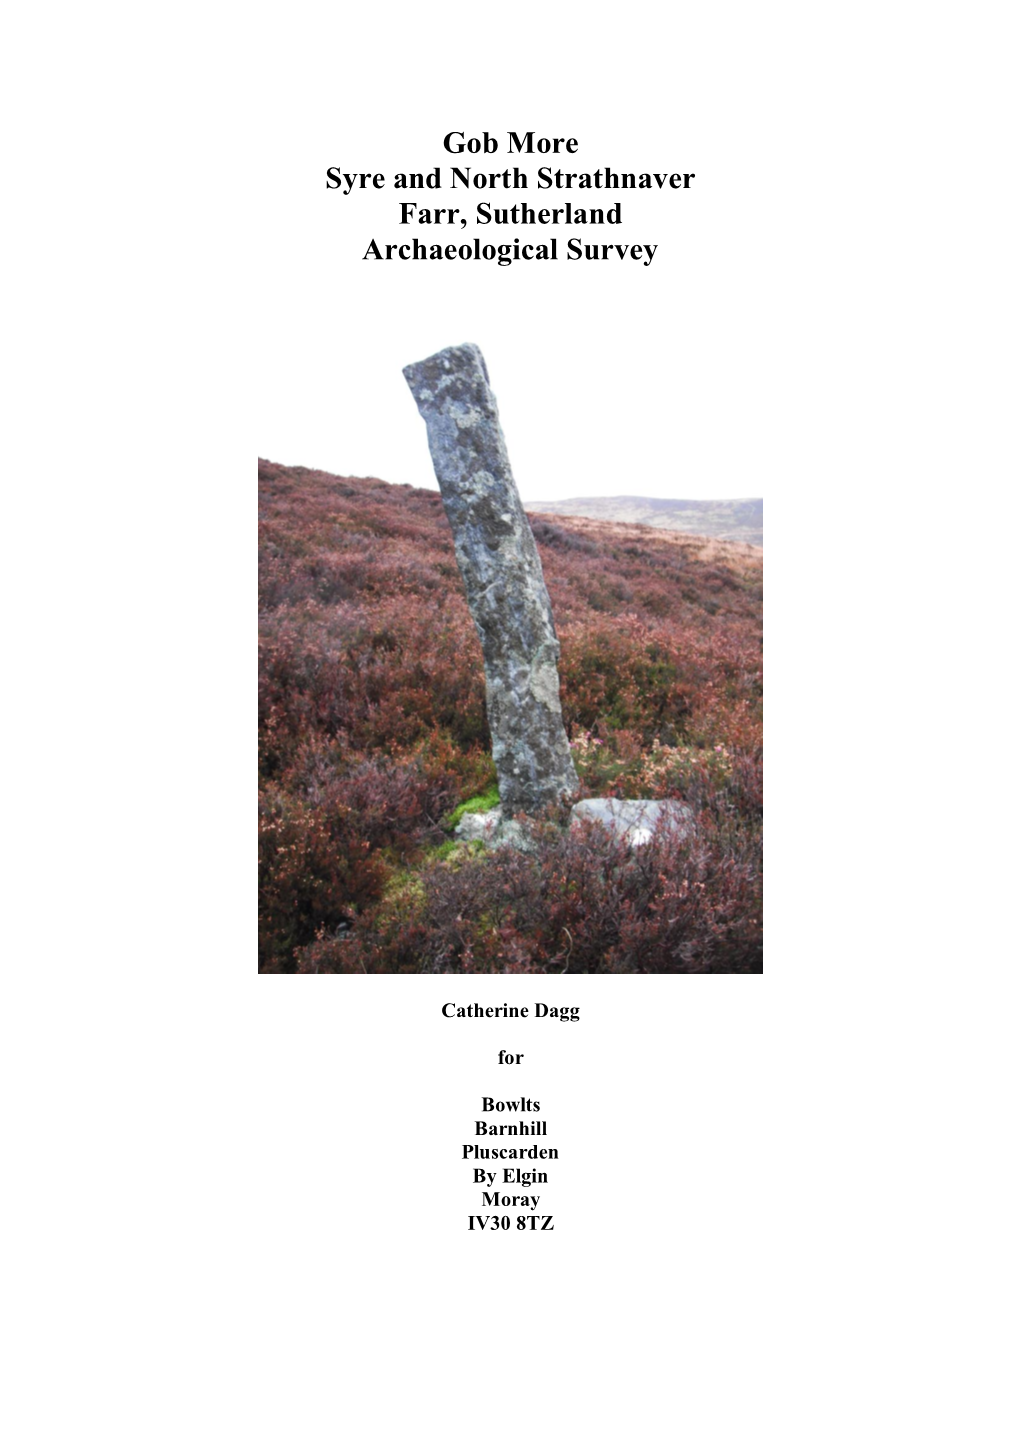 Gob More Syre and North Strathnaver Farr, Sutherland Archaeological Survey